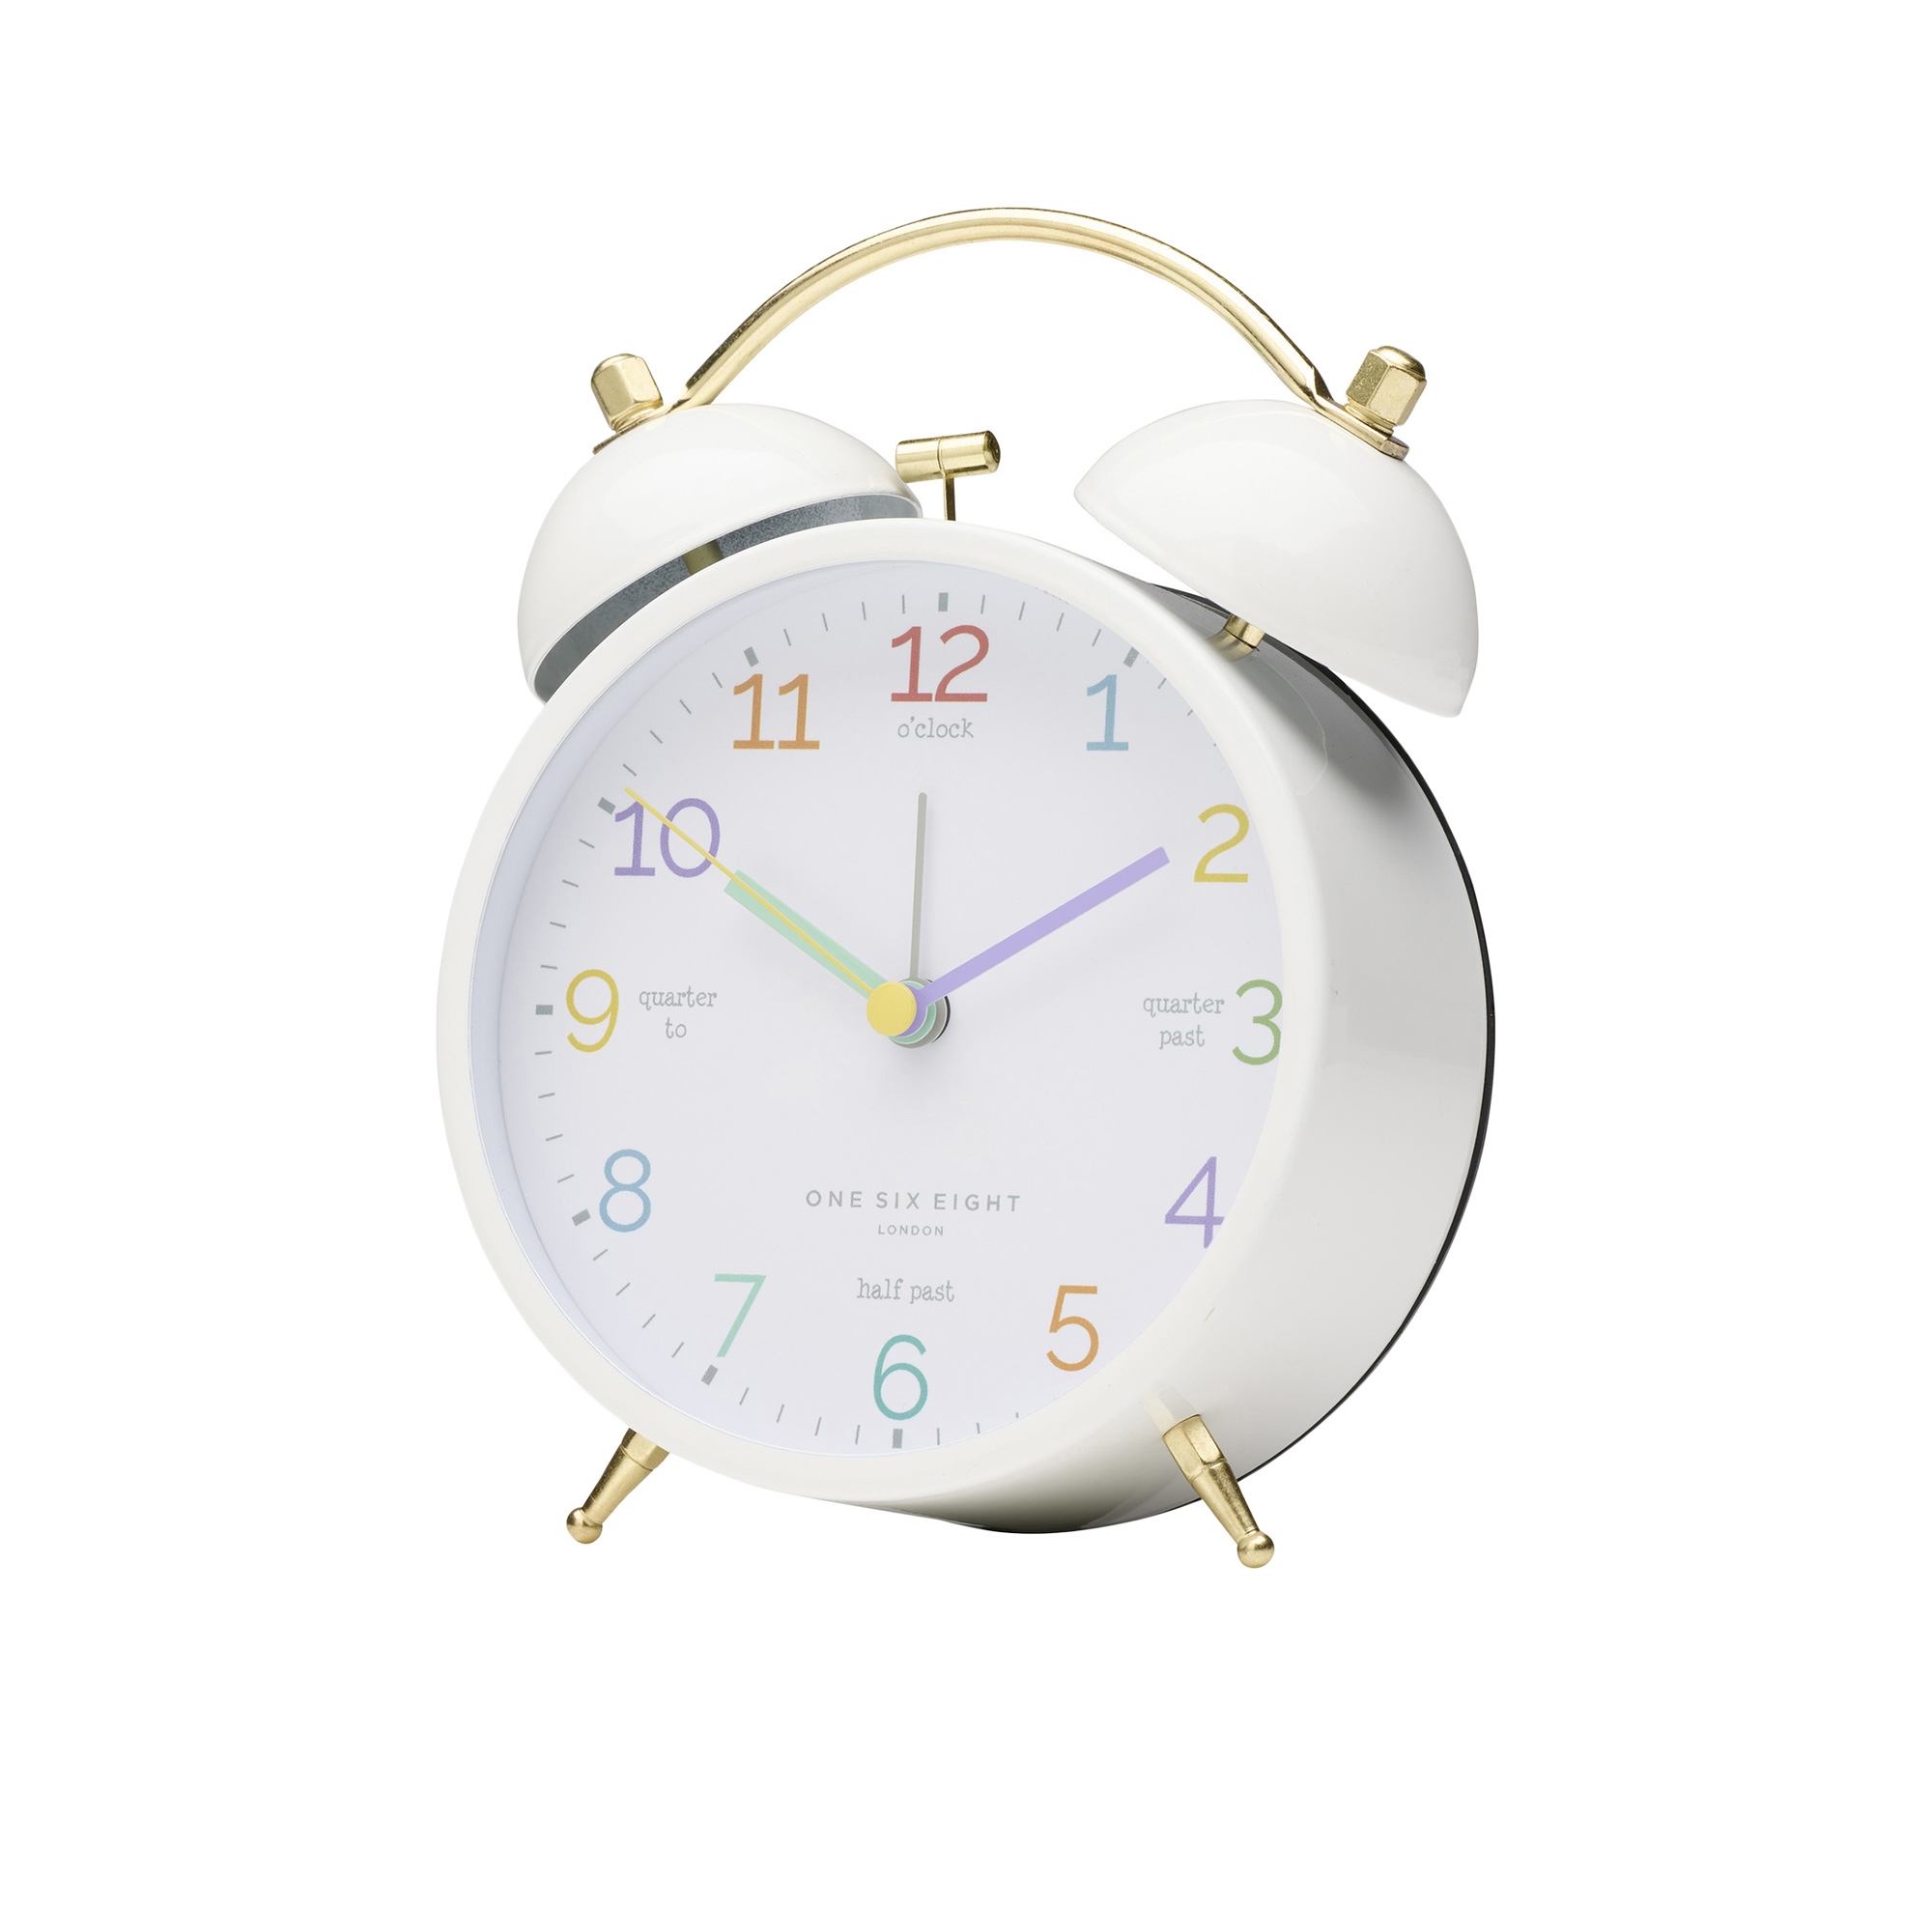 One Six Eight London Learn The Time Alarm Clock White Image 2